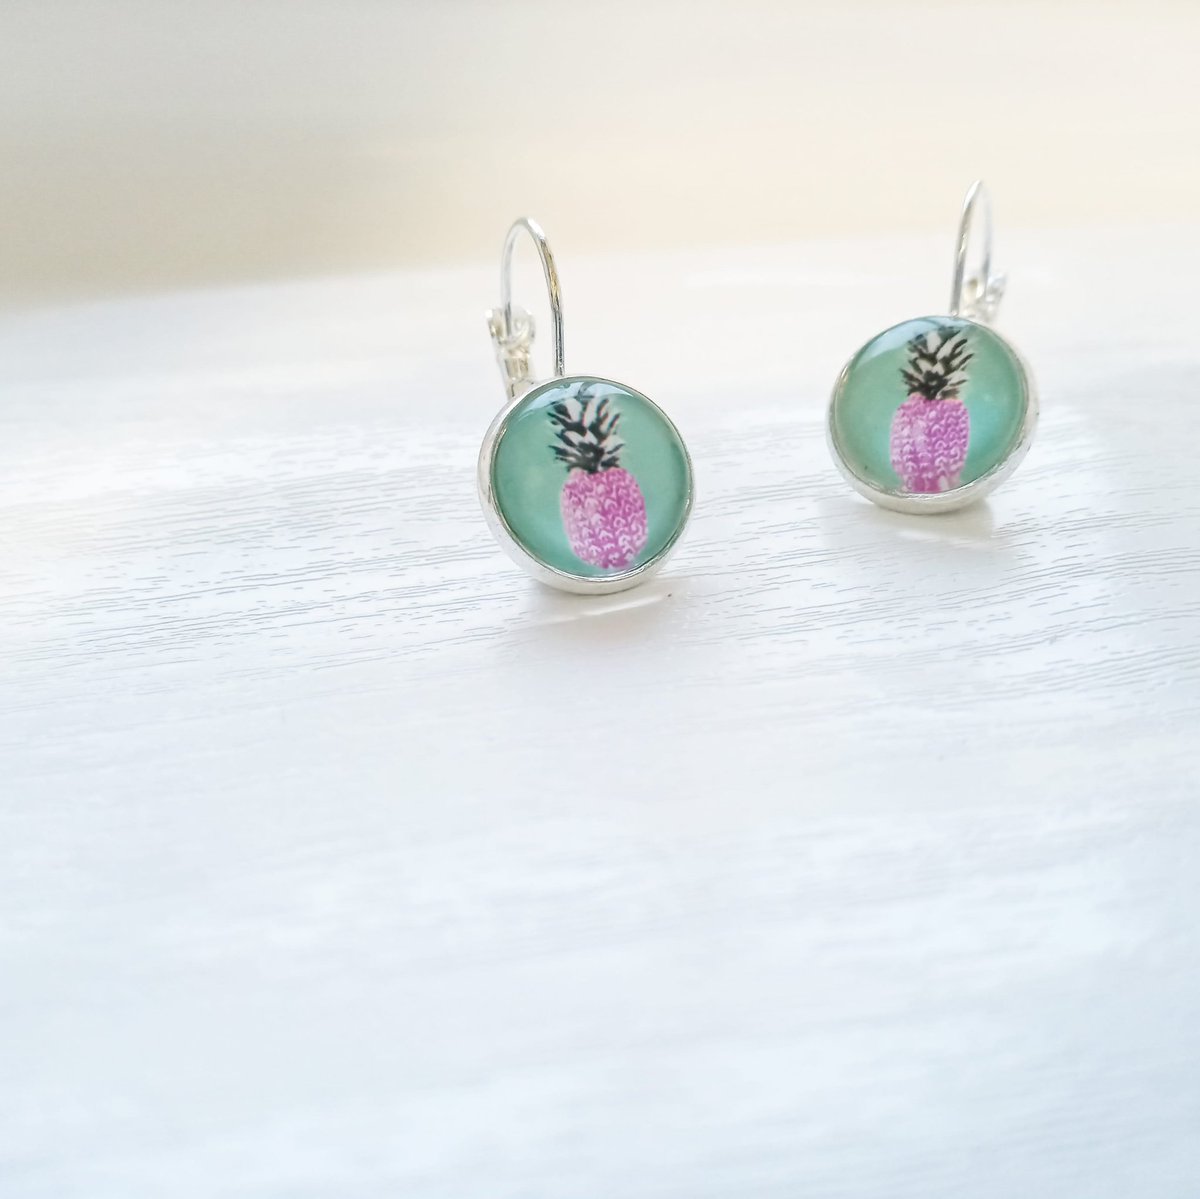 How about some fun kitschy pineapple earrings? Perfect for summer. Prickly yet sweet🍍£6
okapipangolin.sumup.link/pineapple-kits…
#pineapple #pinkpineapple #kitschycute #pineappleearrings #funjewellery #summerearrings #summer #cuteearrings #kitsch #retro #okapipangolin #okapipangolinjewellery